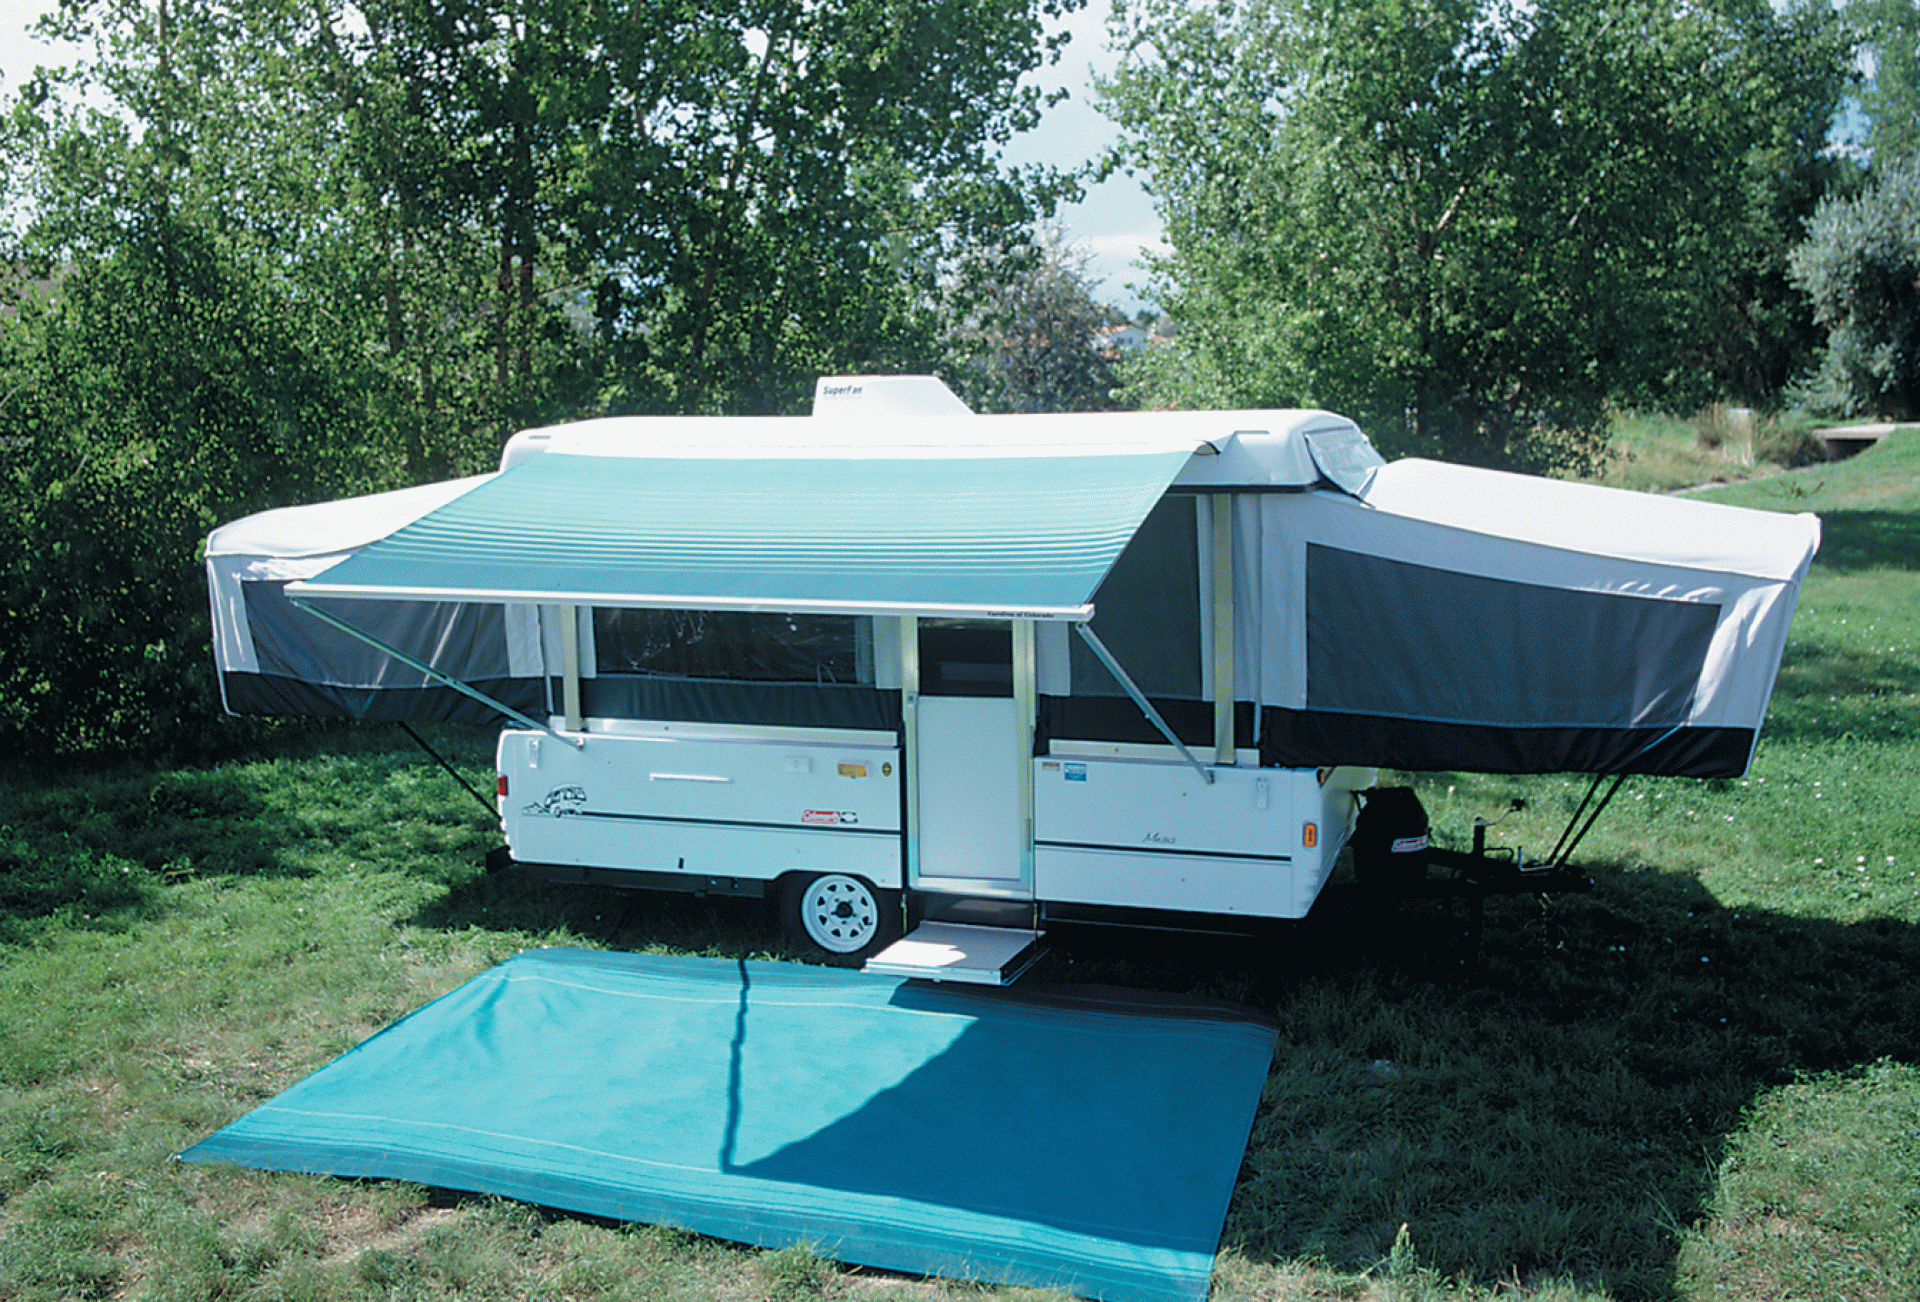 CAREFREE OF COLORADO | 981578A00 | Campout Awning Metric 4.0 Metric 13' 1" Sierra Brown Dune Stripe with White Bag